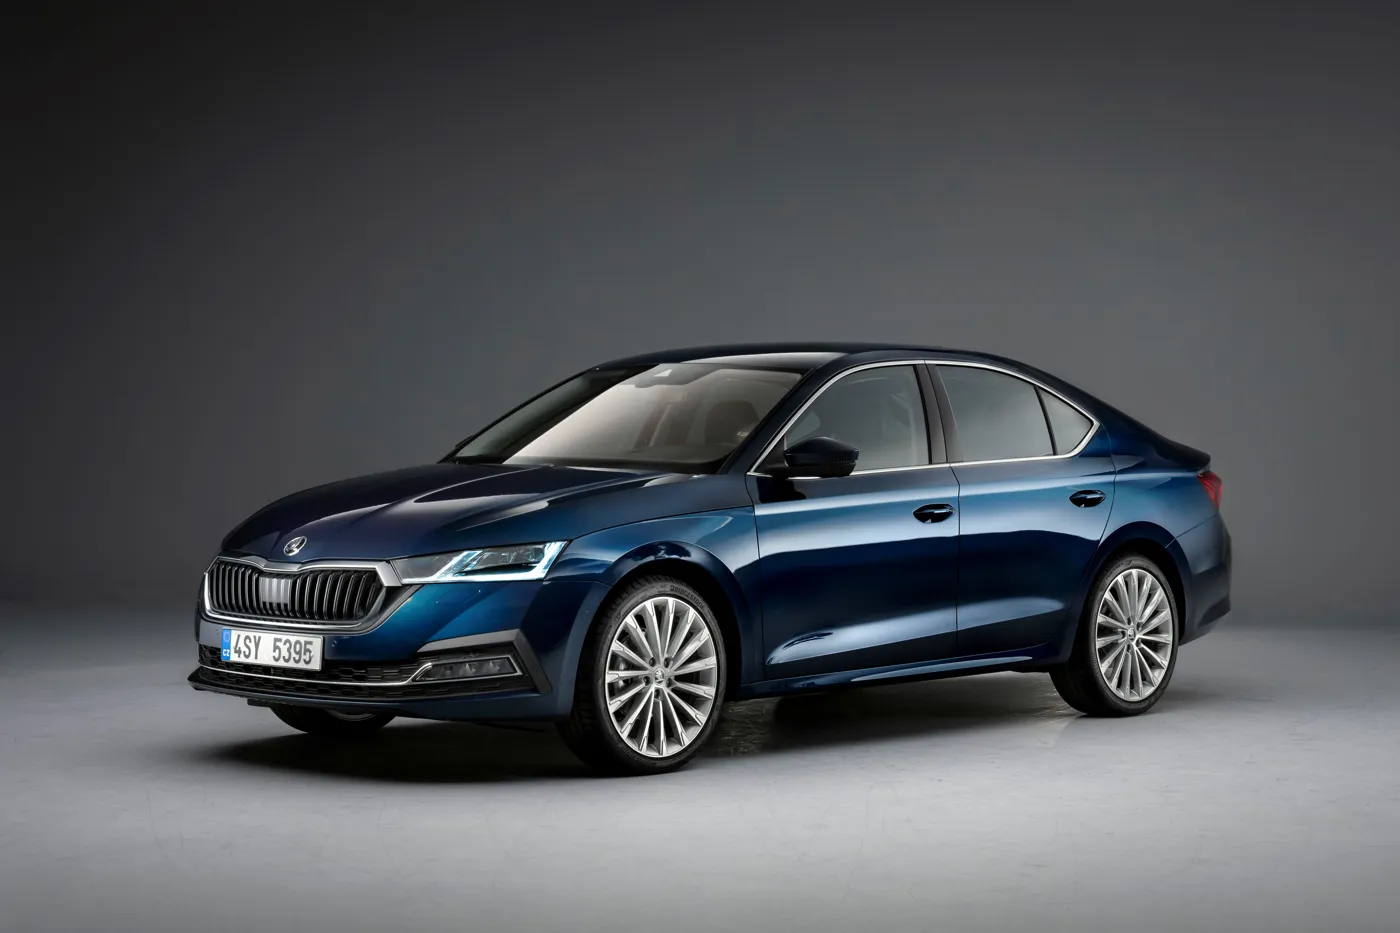 New Skoda Octavia 4th Generation New Model, On Road Price, Mileage, Features